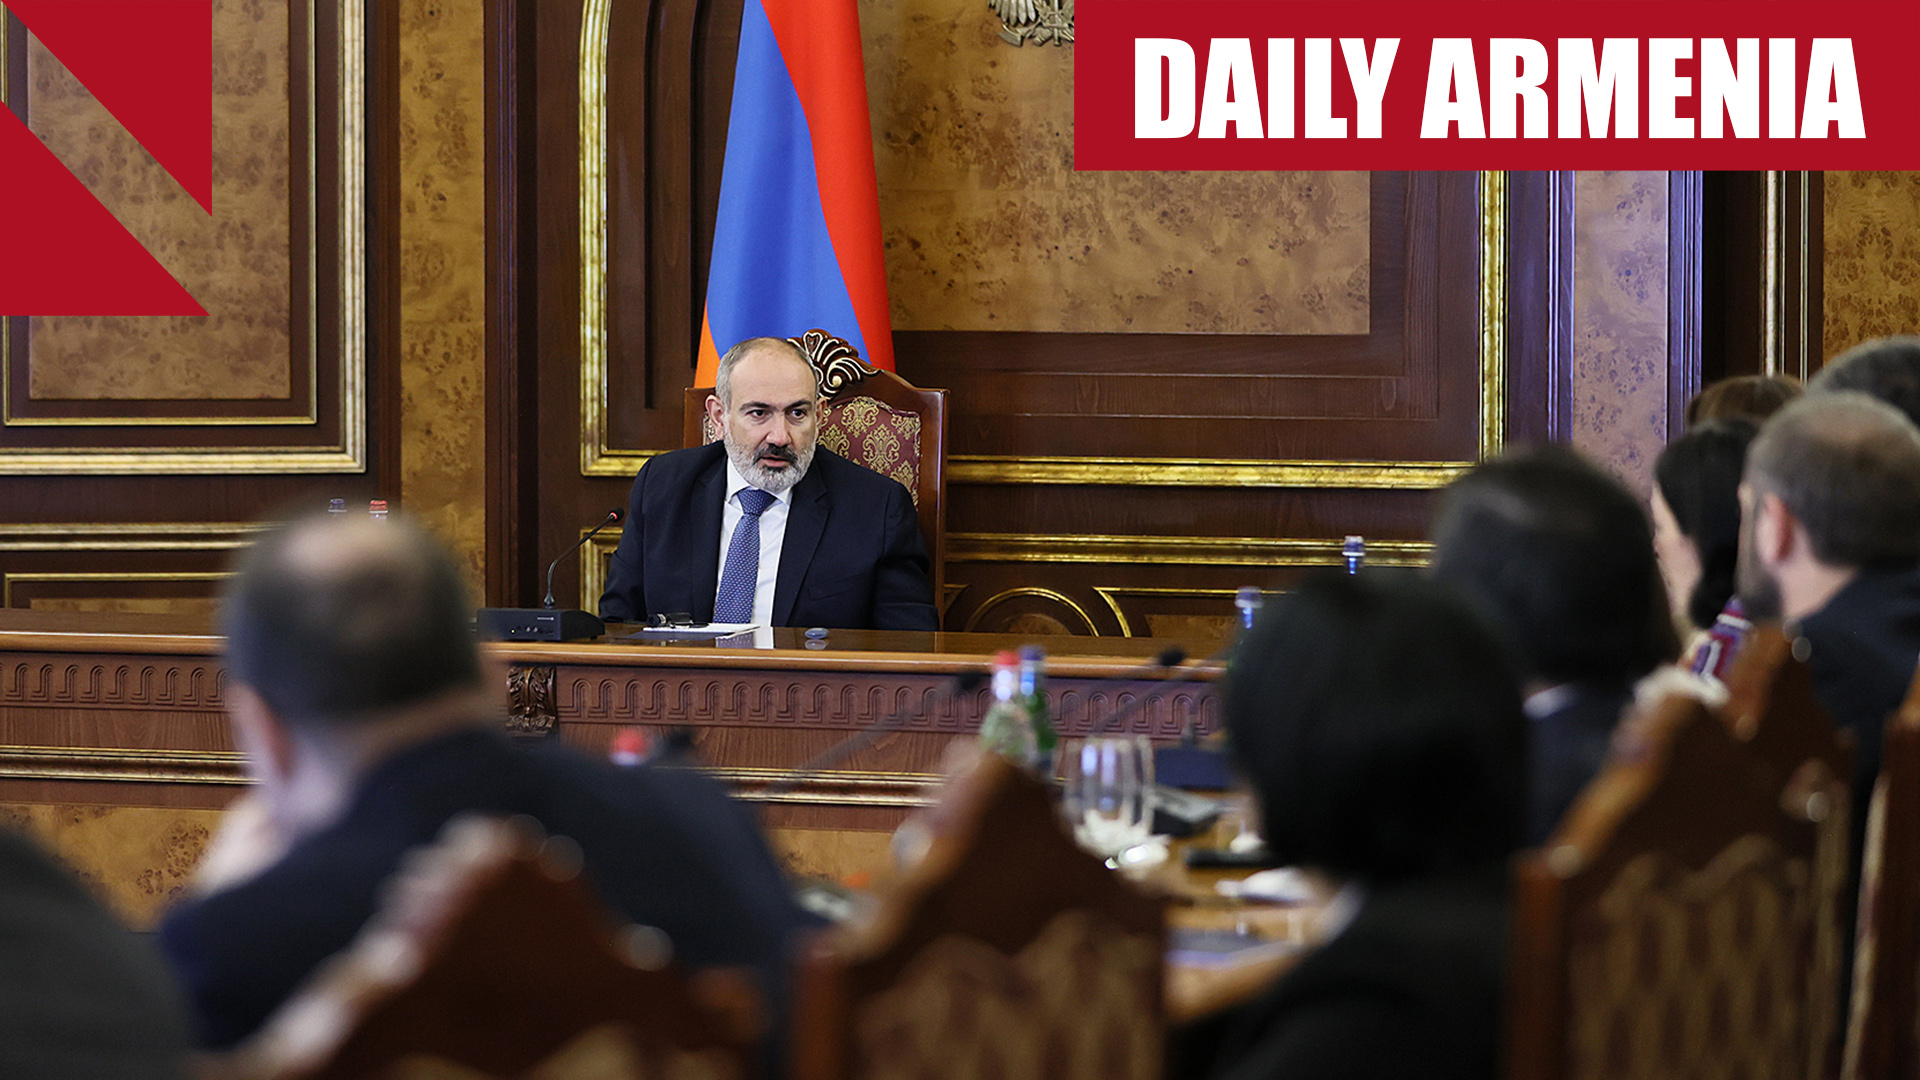 Pashinyan says border delimitation is a matter of Armenia’s existence